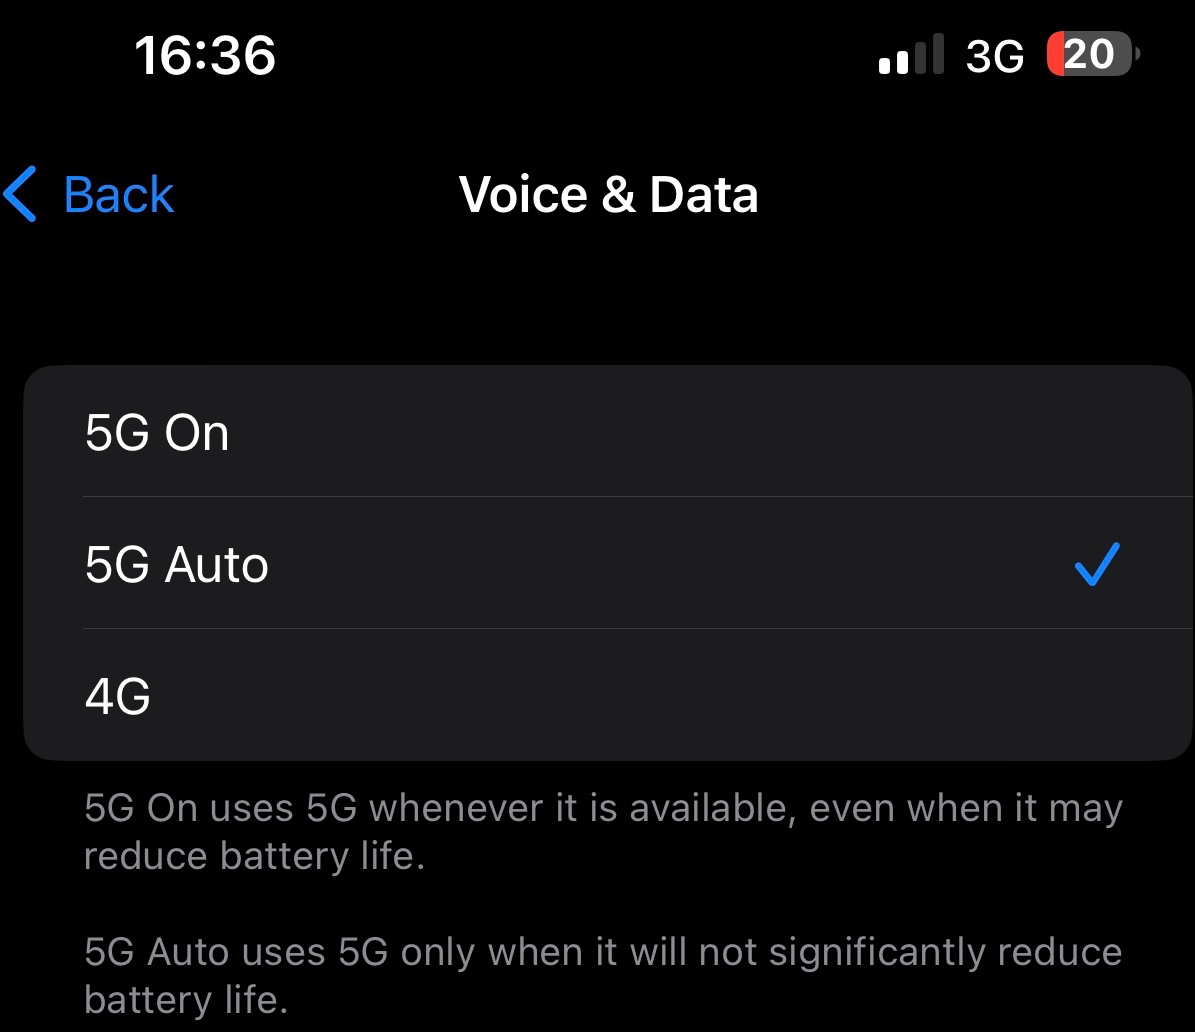 2G/3G/4G can not be selected separately ...